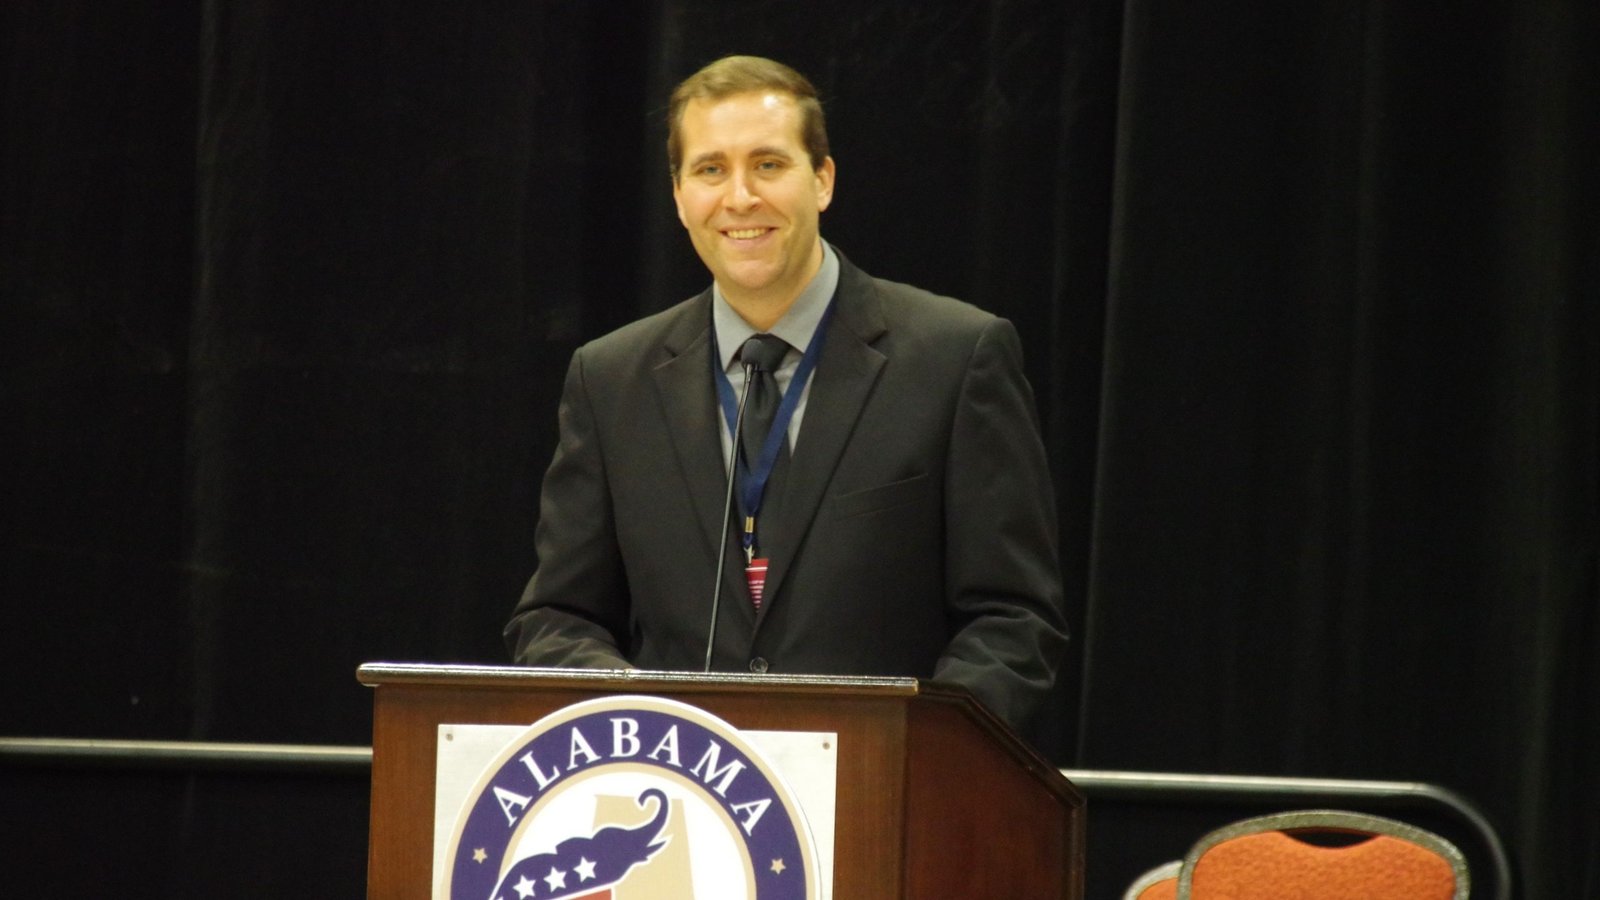 ALGOP chairman wins second term at party's winter meeting